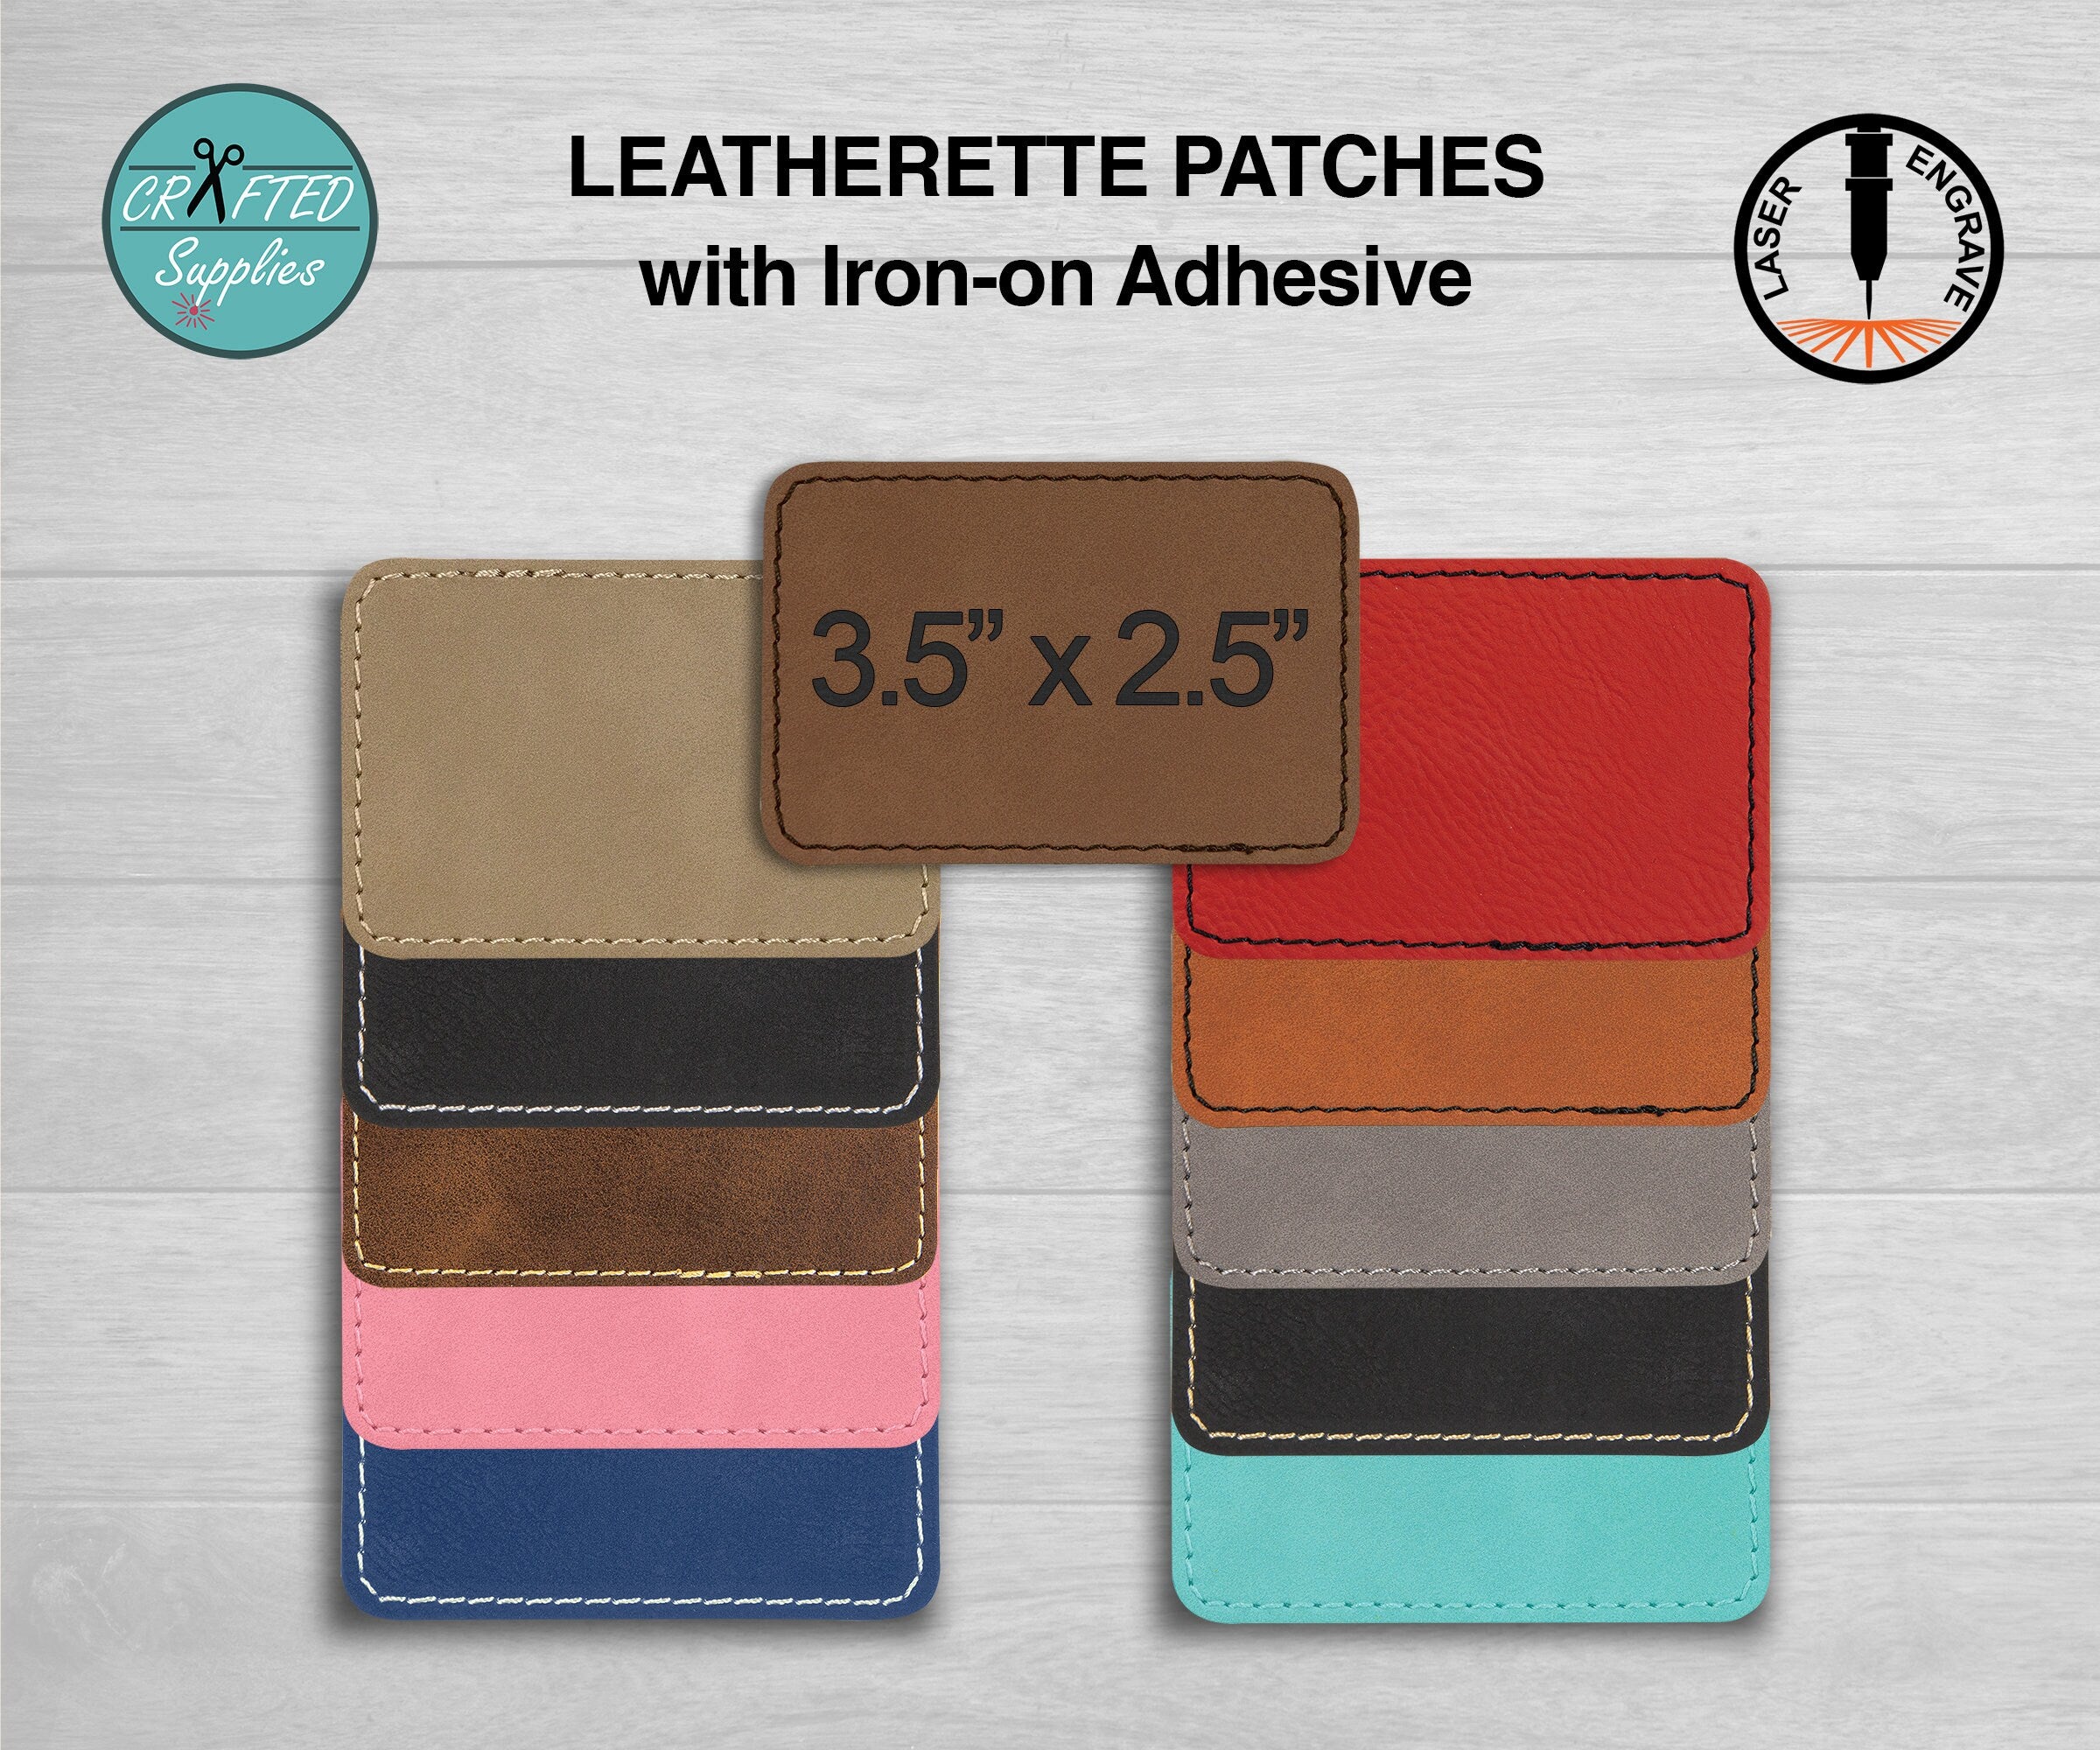 Leatherette Patch, LG Rectangle 3.5 in x 2.5 in